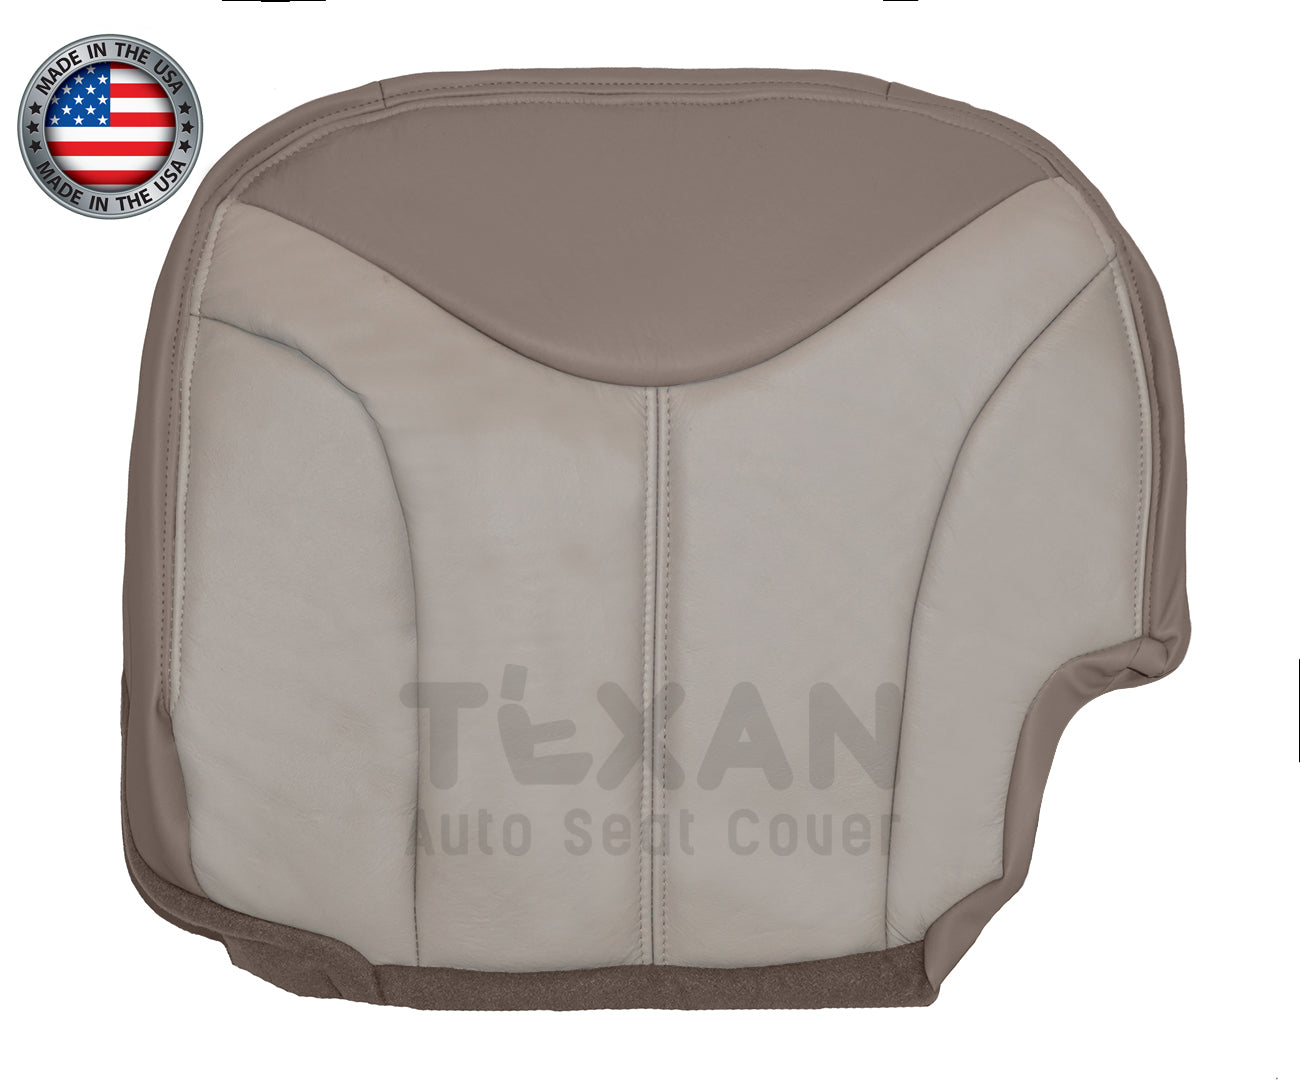 2001, 2002 GMC Sierra Denali C3 Passenger Side Bottom Synthetic Leather Replacement Seat Cover 2-Tone Tan